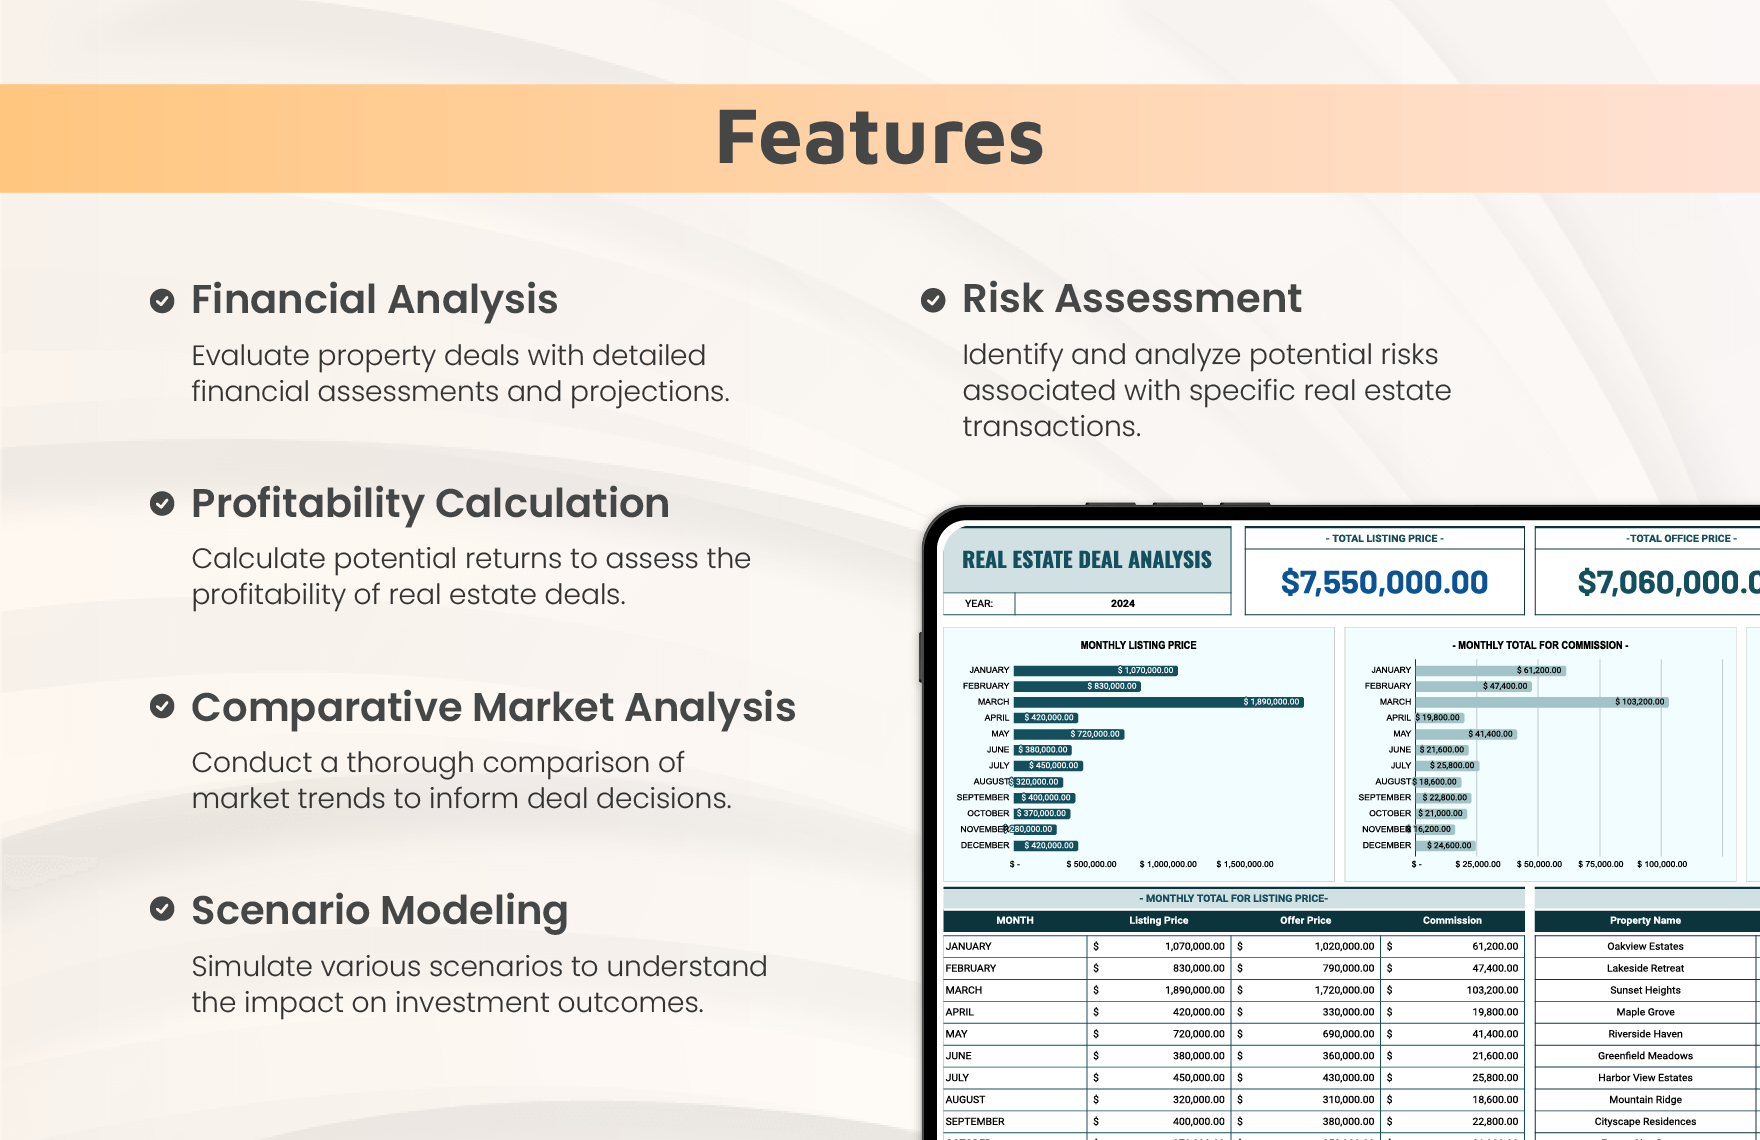 Real Estate Deal Analysis Template